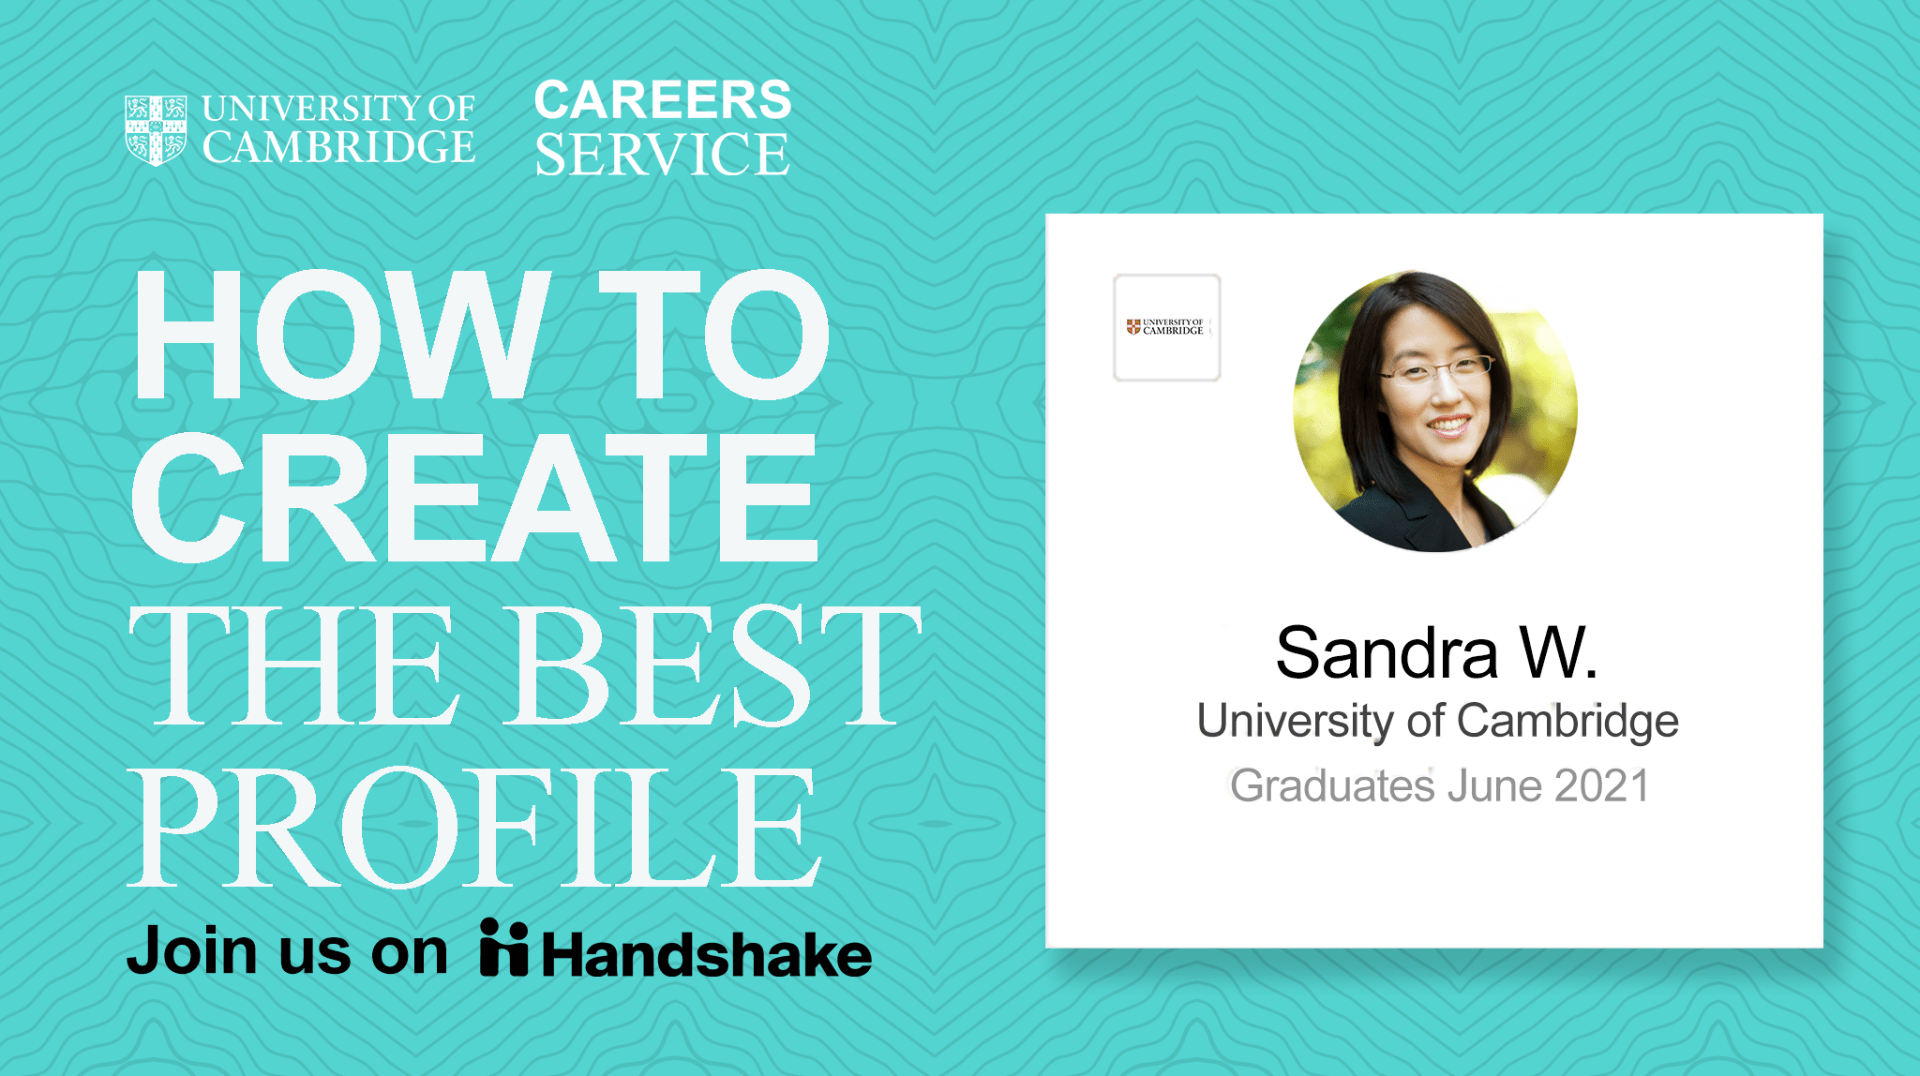 How to create the best profile - join us on Handshake